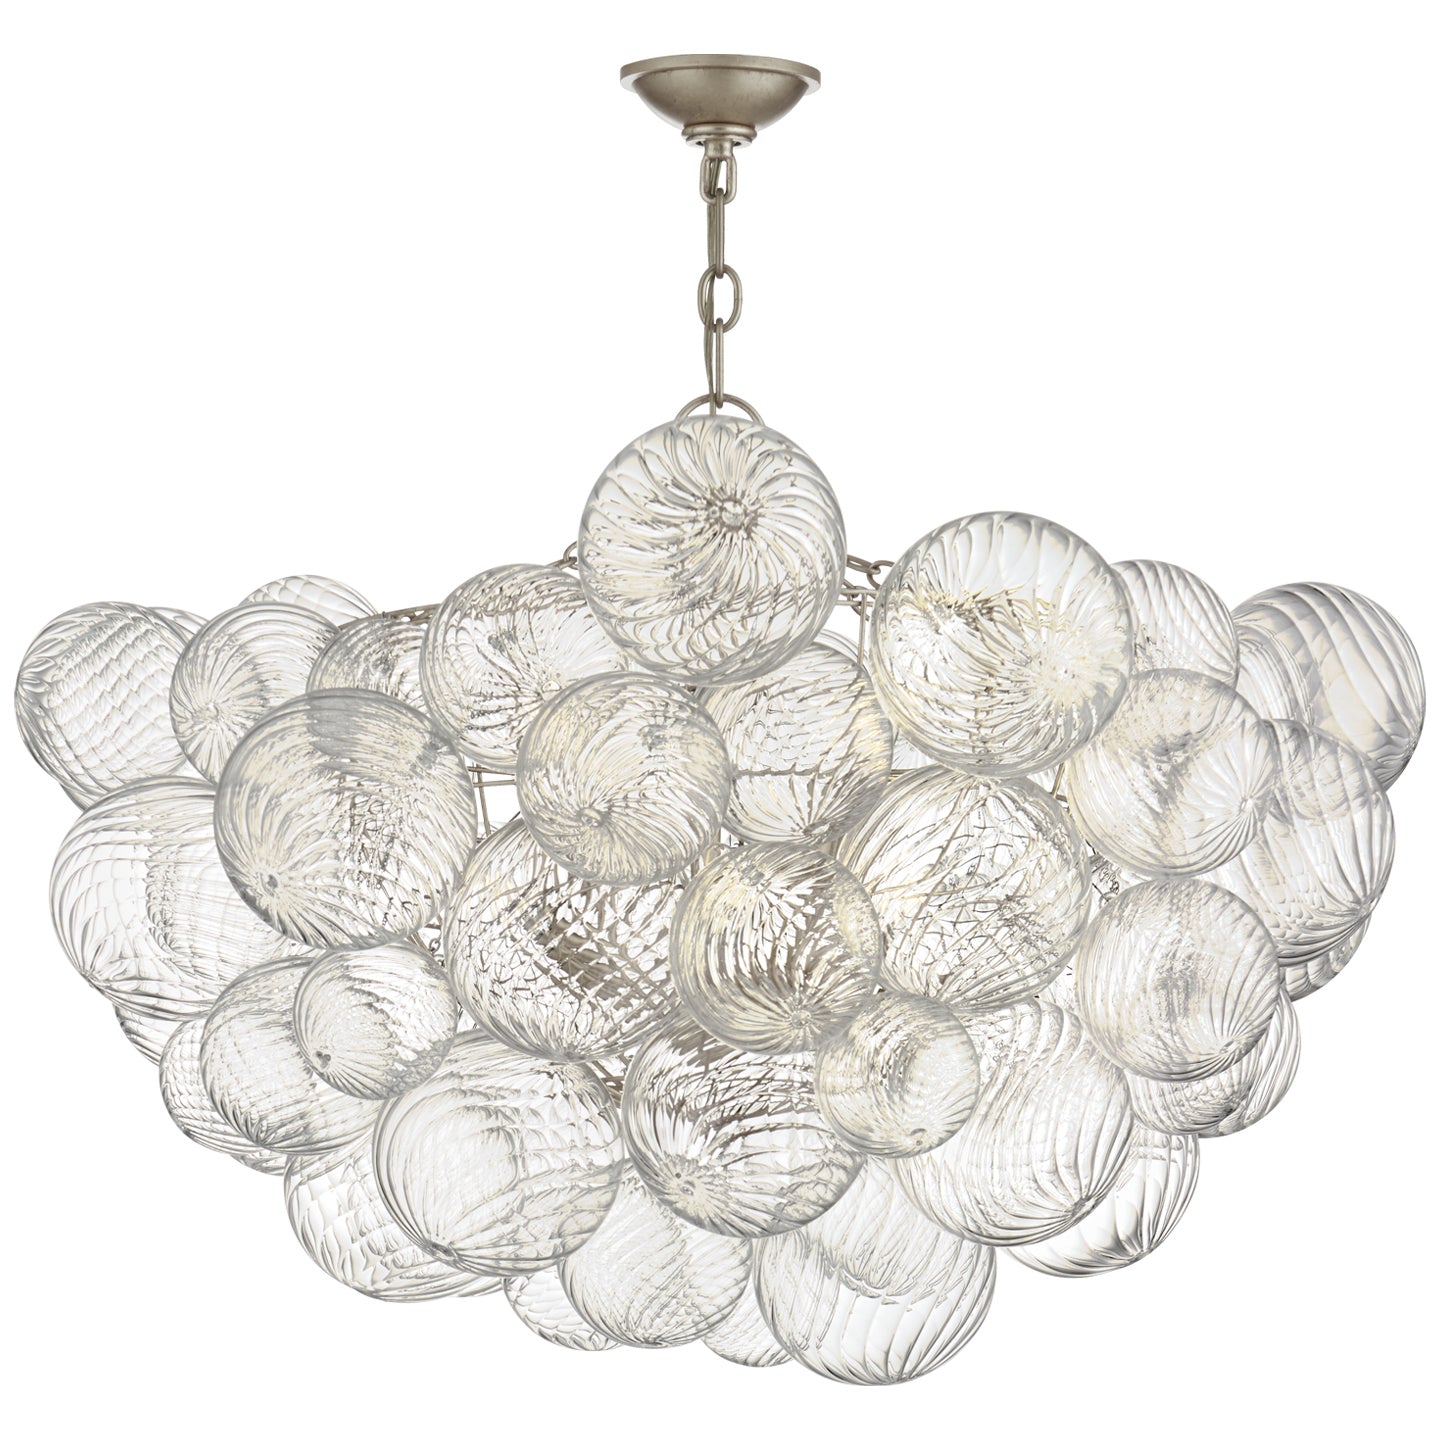 Visual Comfort Signature Canada - Eight Light Chandelier - Talia - Burnished Silver Leaf and Clear Swirled Glass- Union Lighting Luminaires Decor